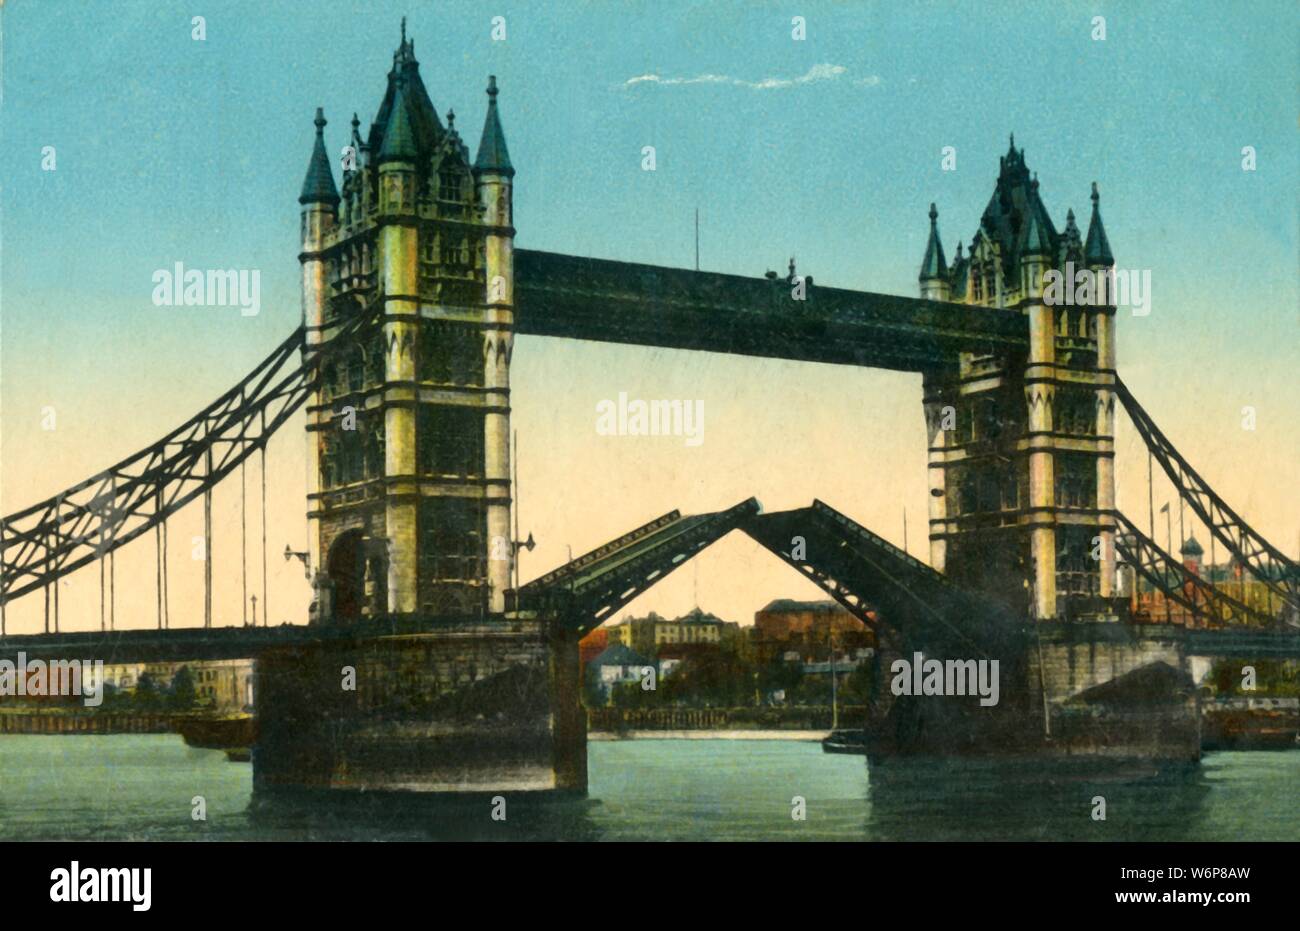 Tower Bridge, London, c1910. View of Tower Bridge with bascules open, and the River Thames. The construction of the bridge was begun in 1881 to designs by Sir Horace Jones and it opened in 1894. It was designed so that the central section could be raised to allow the passage of ships to and from the busy wharves of London. Postcard. Stock Photo